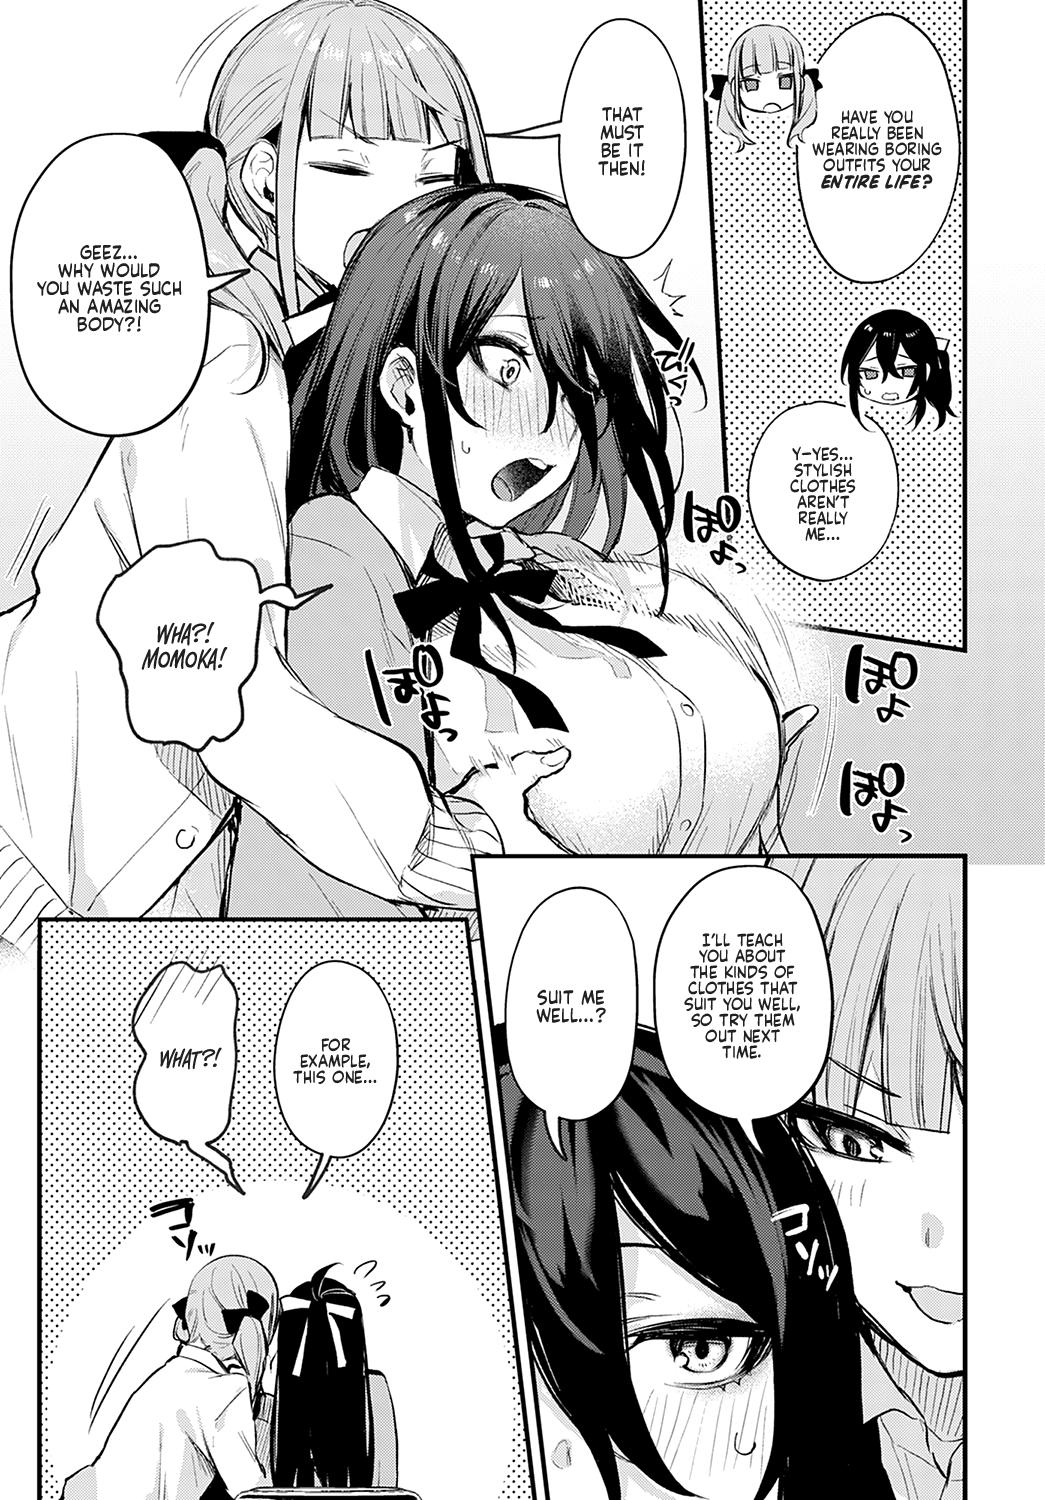 Moaning Koi no Susumekata | How to Advance Your Love Smoking - Page 7